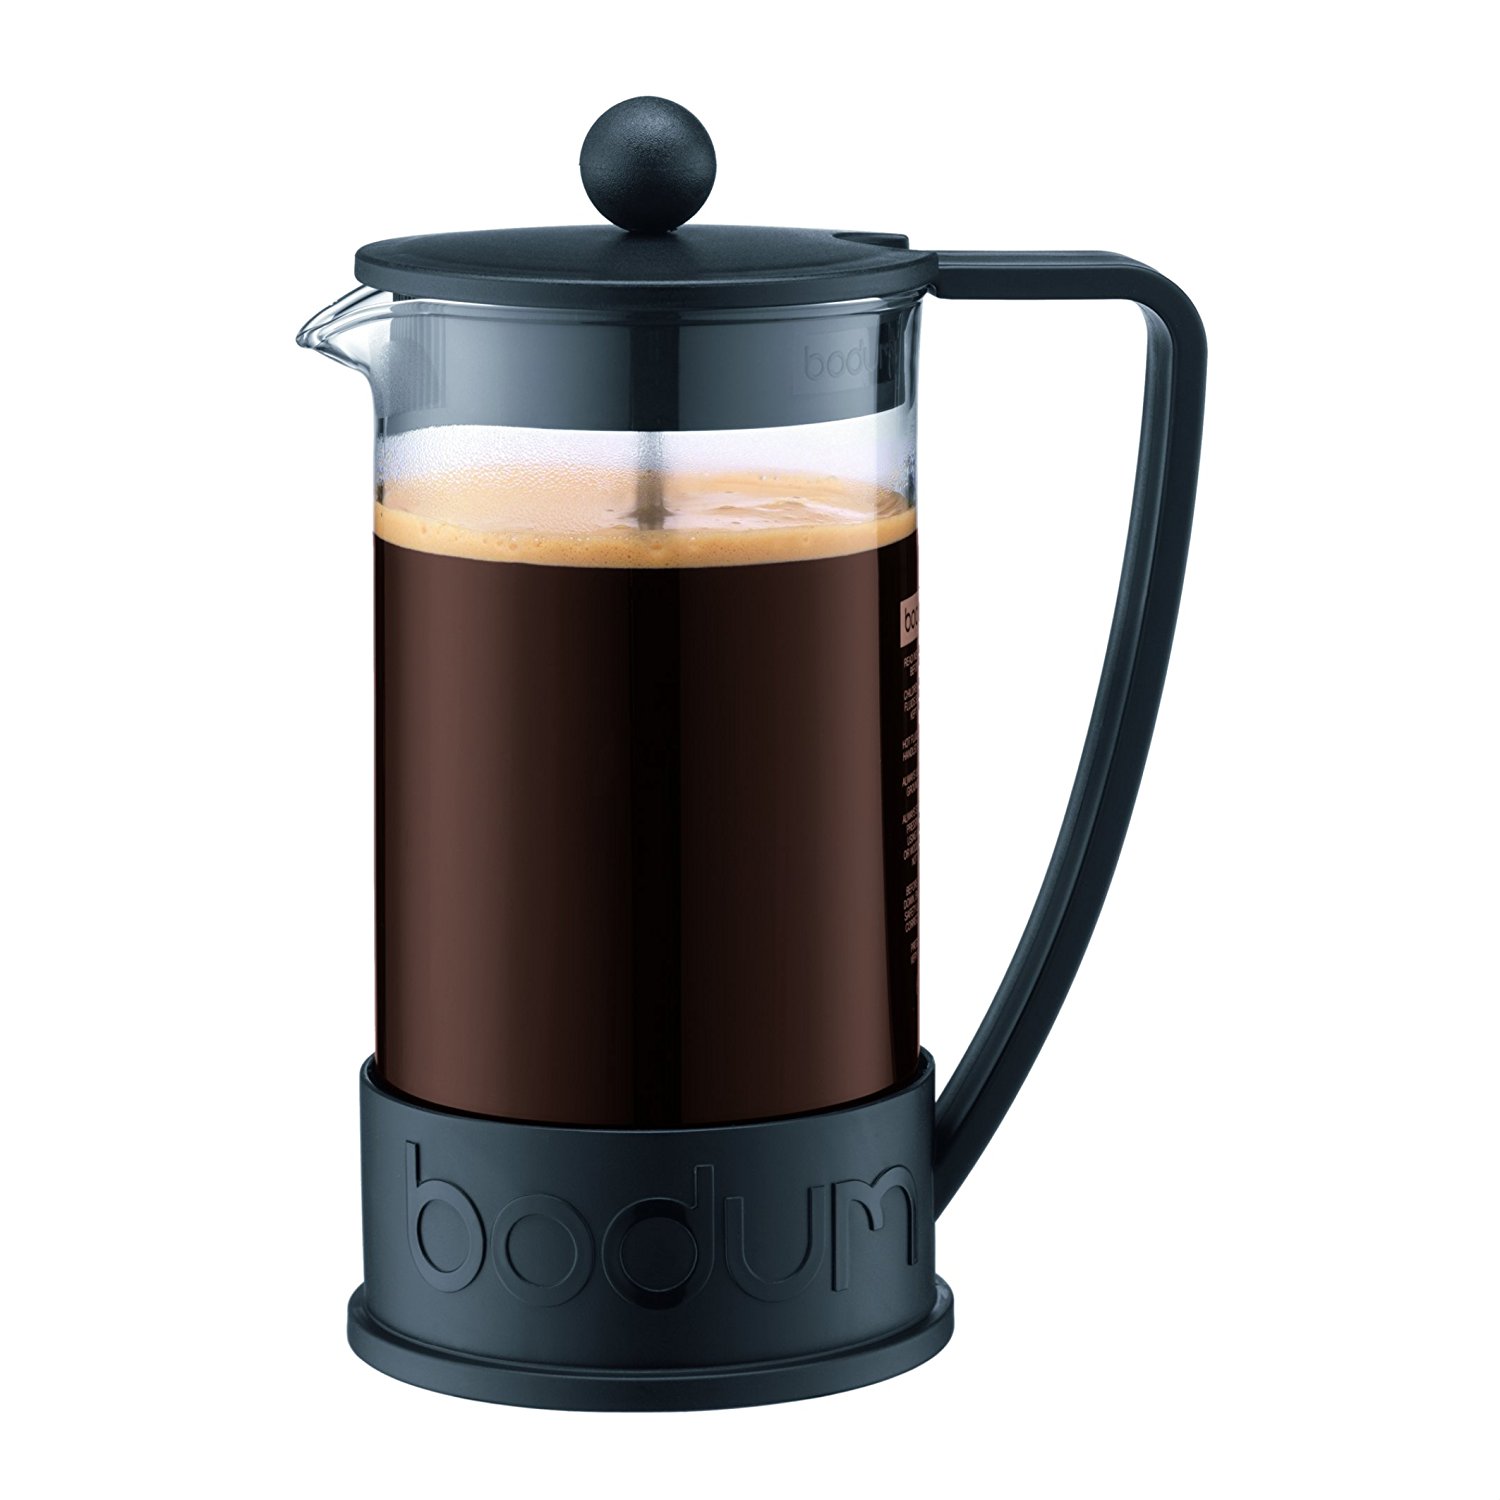 Bodum French Press coffee maker for $14